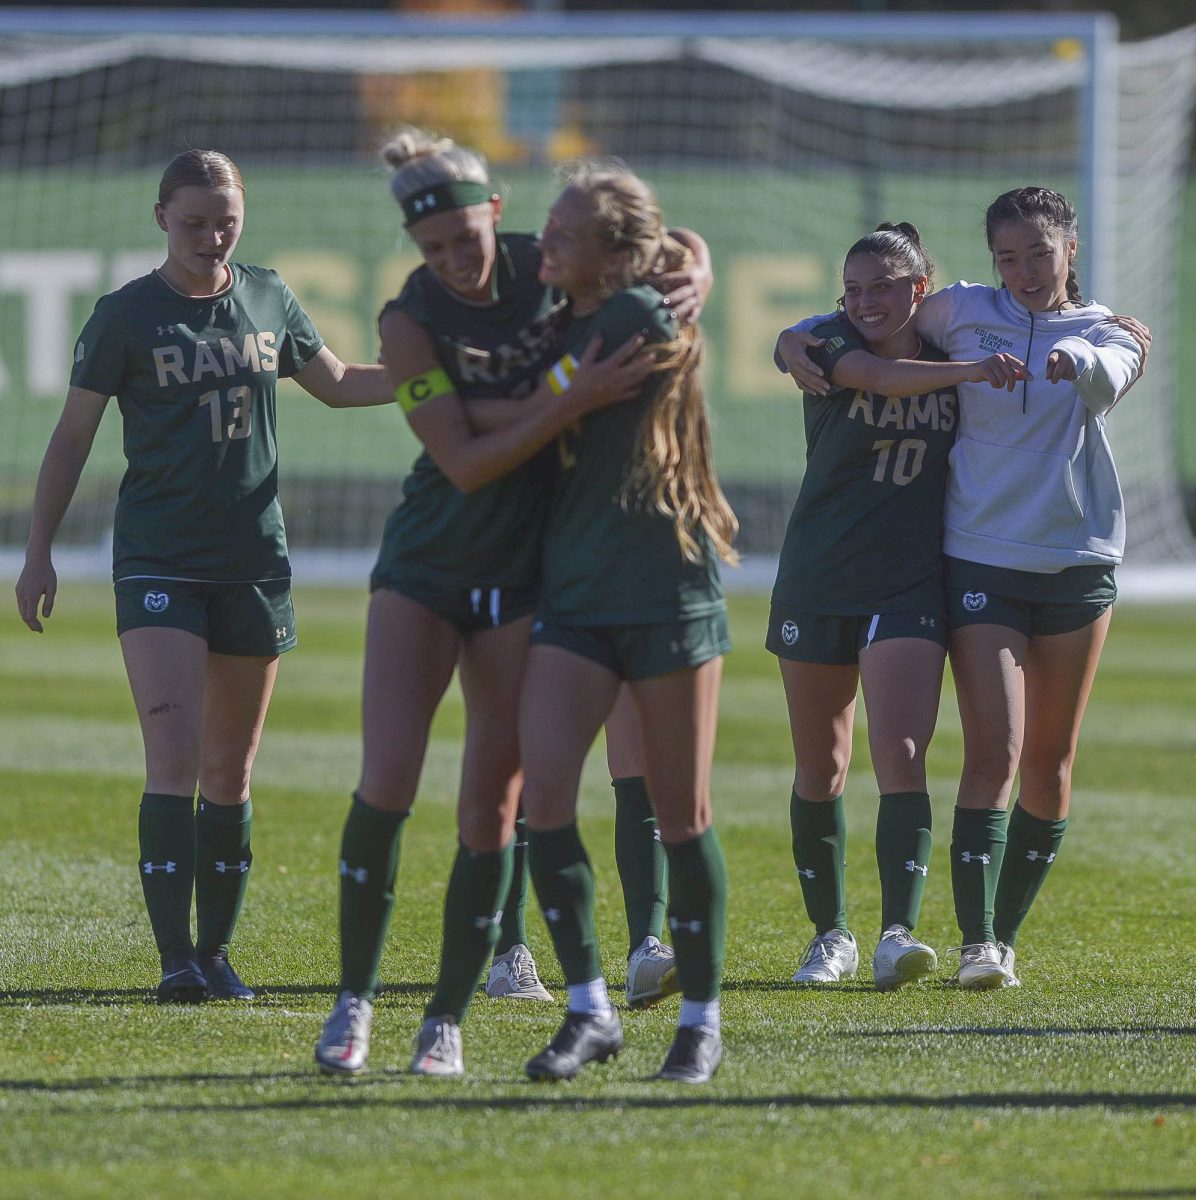 Colorado State University Womens Soccer players celebrate their win of 1-0 against Air Force Academy on October 15. 